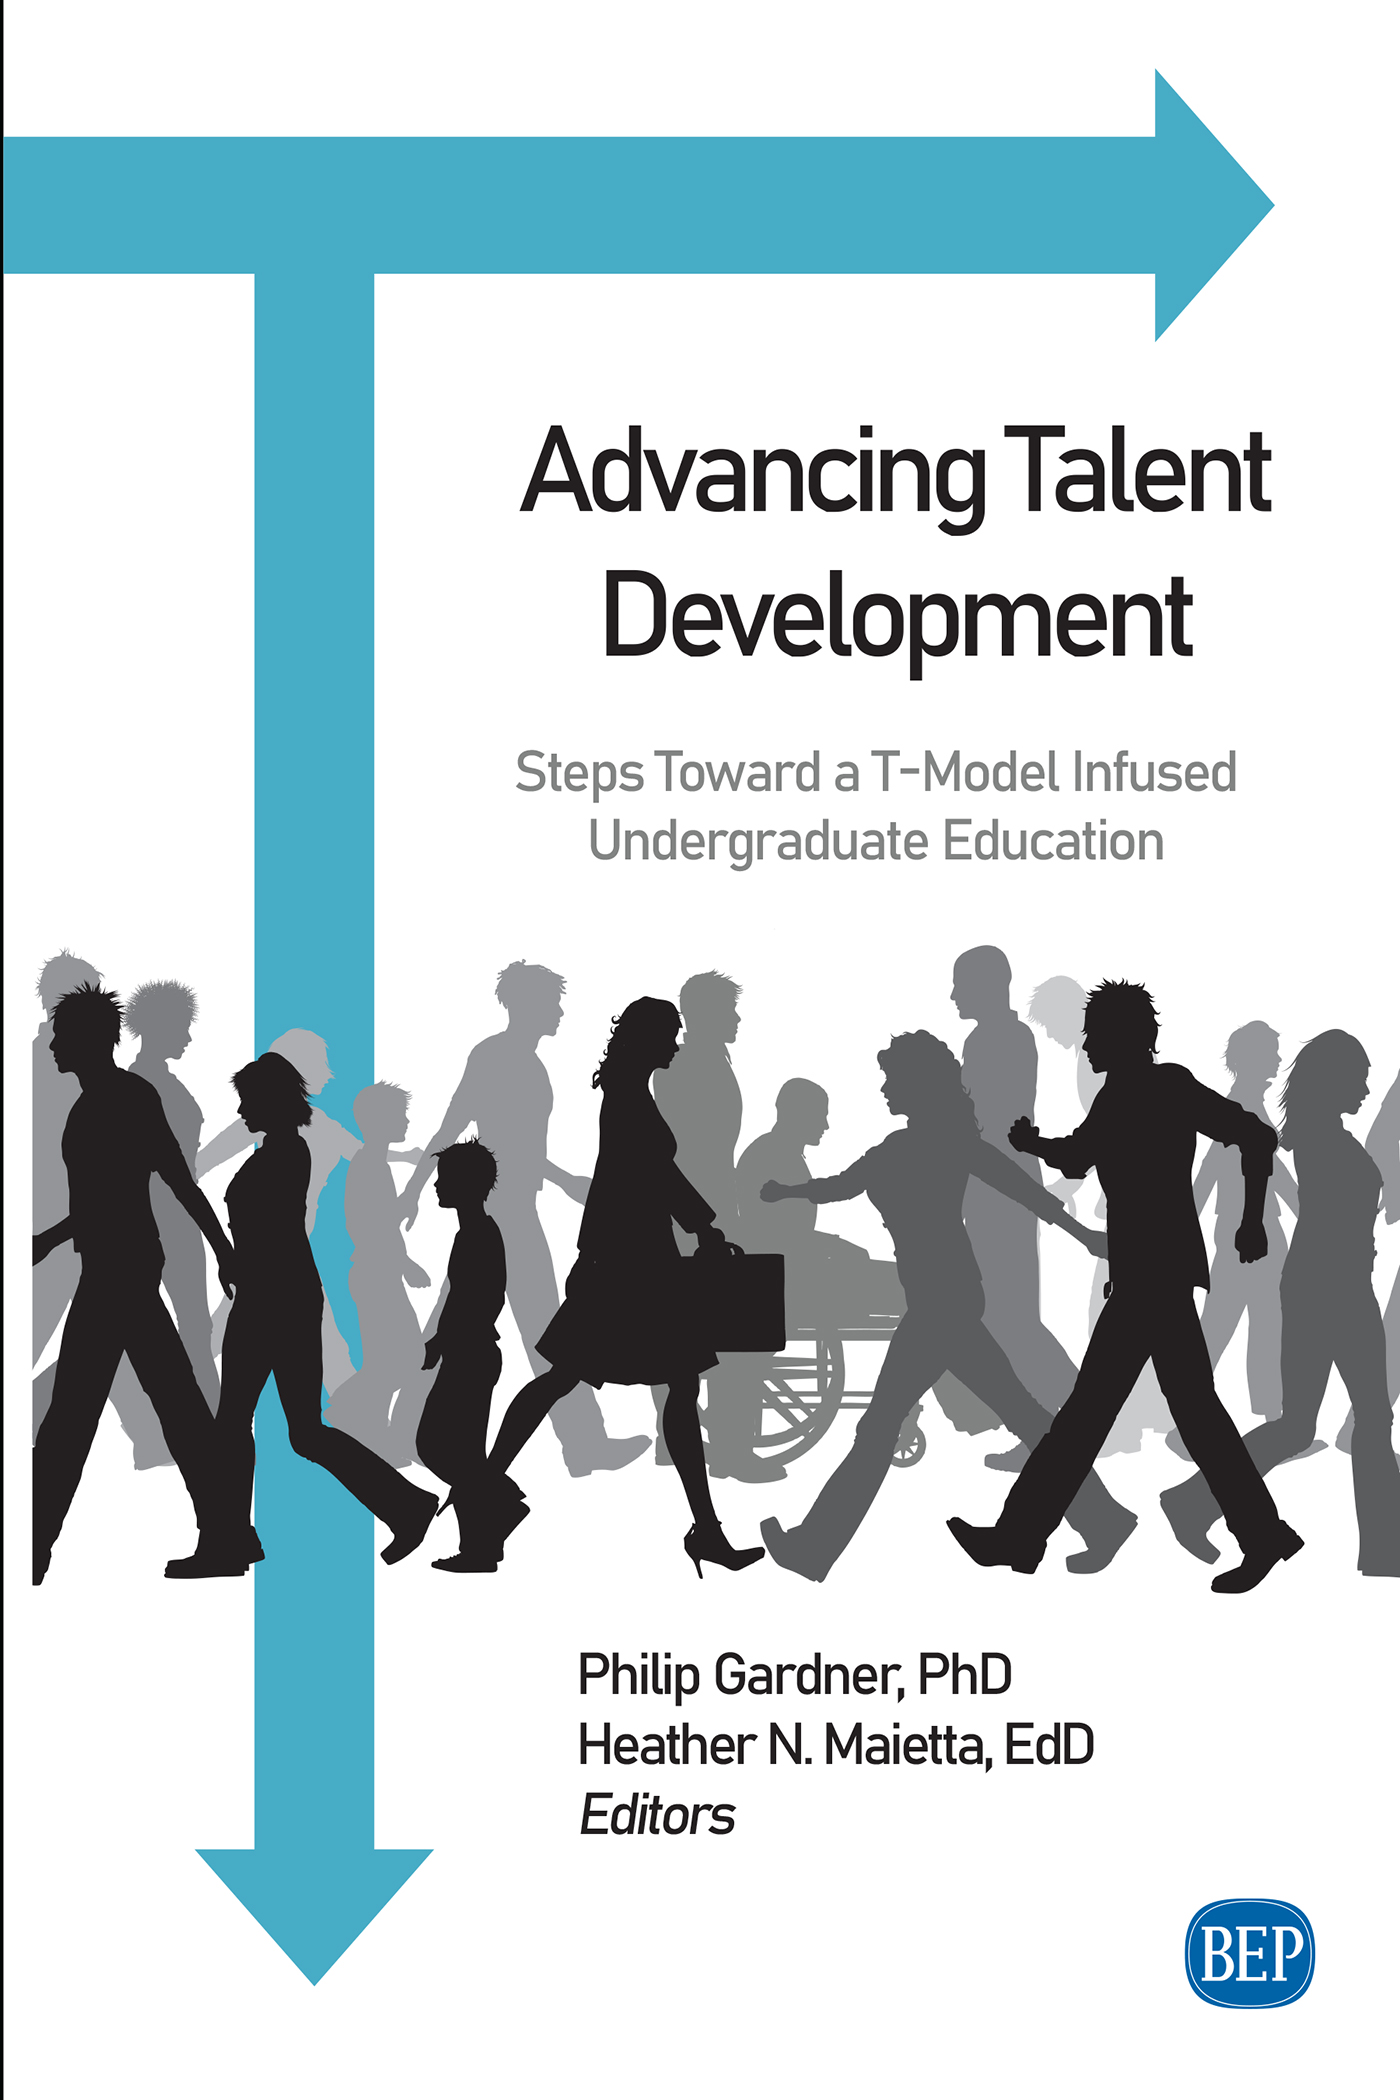 image of Advancing Talent Development book cover